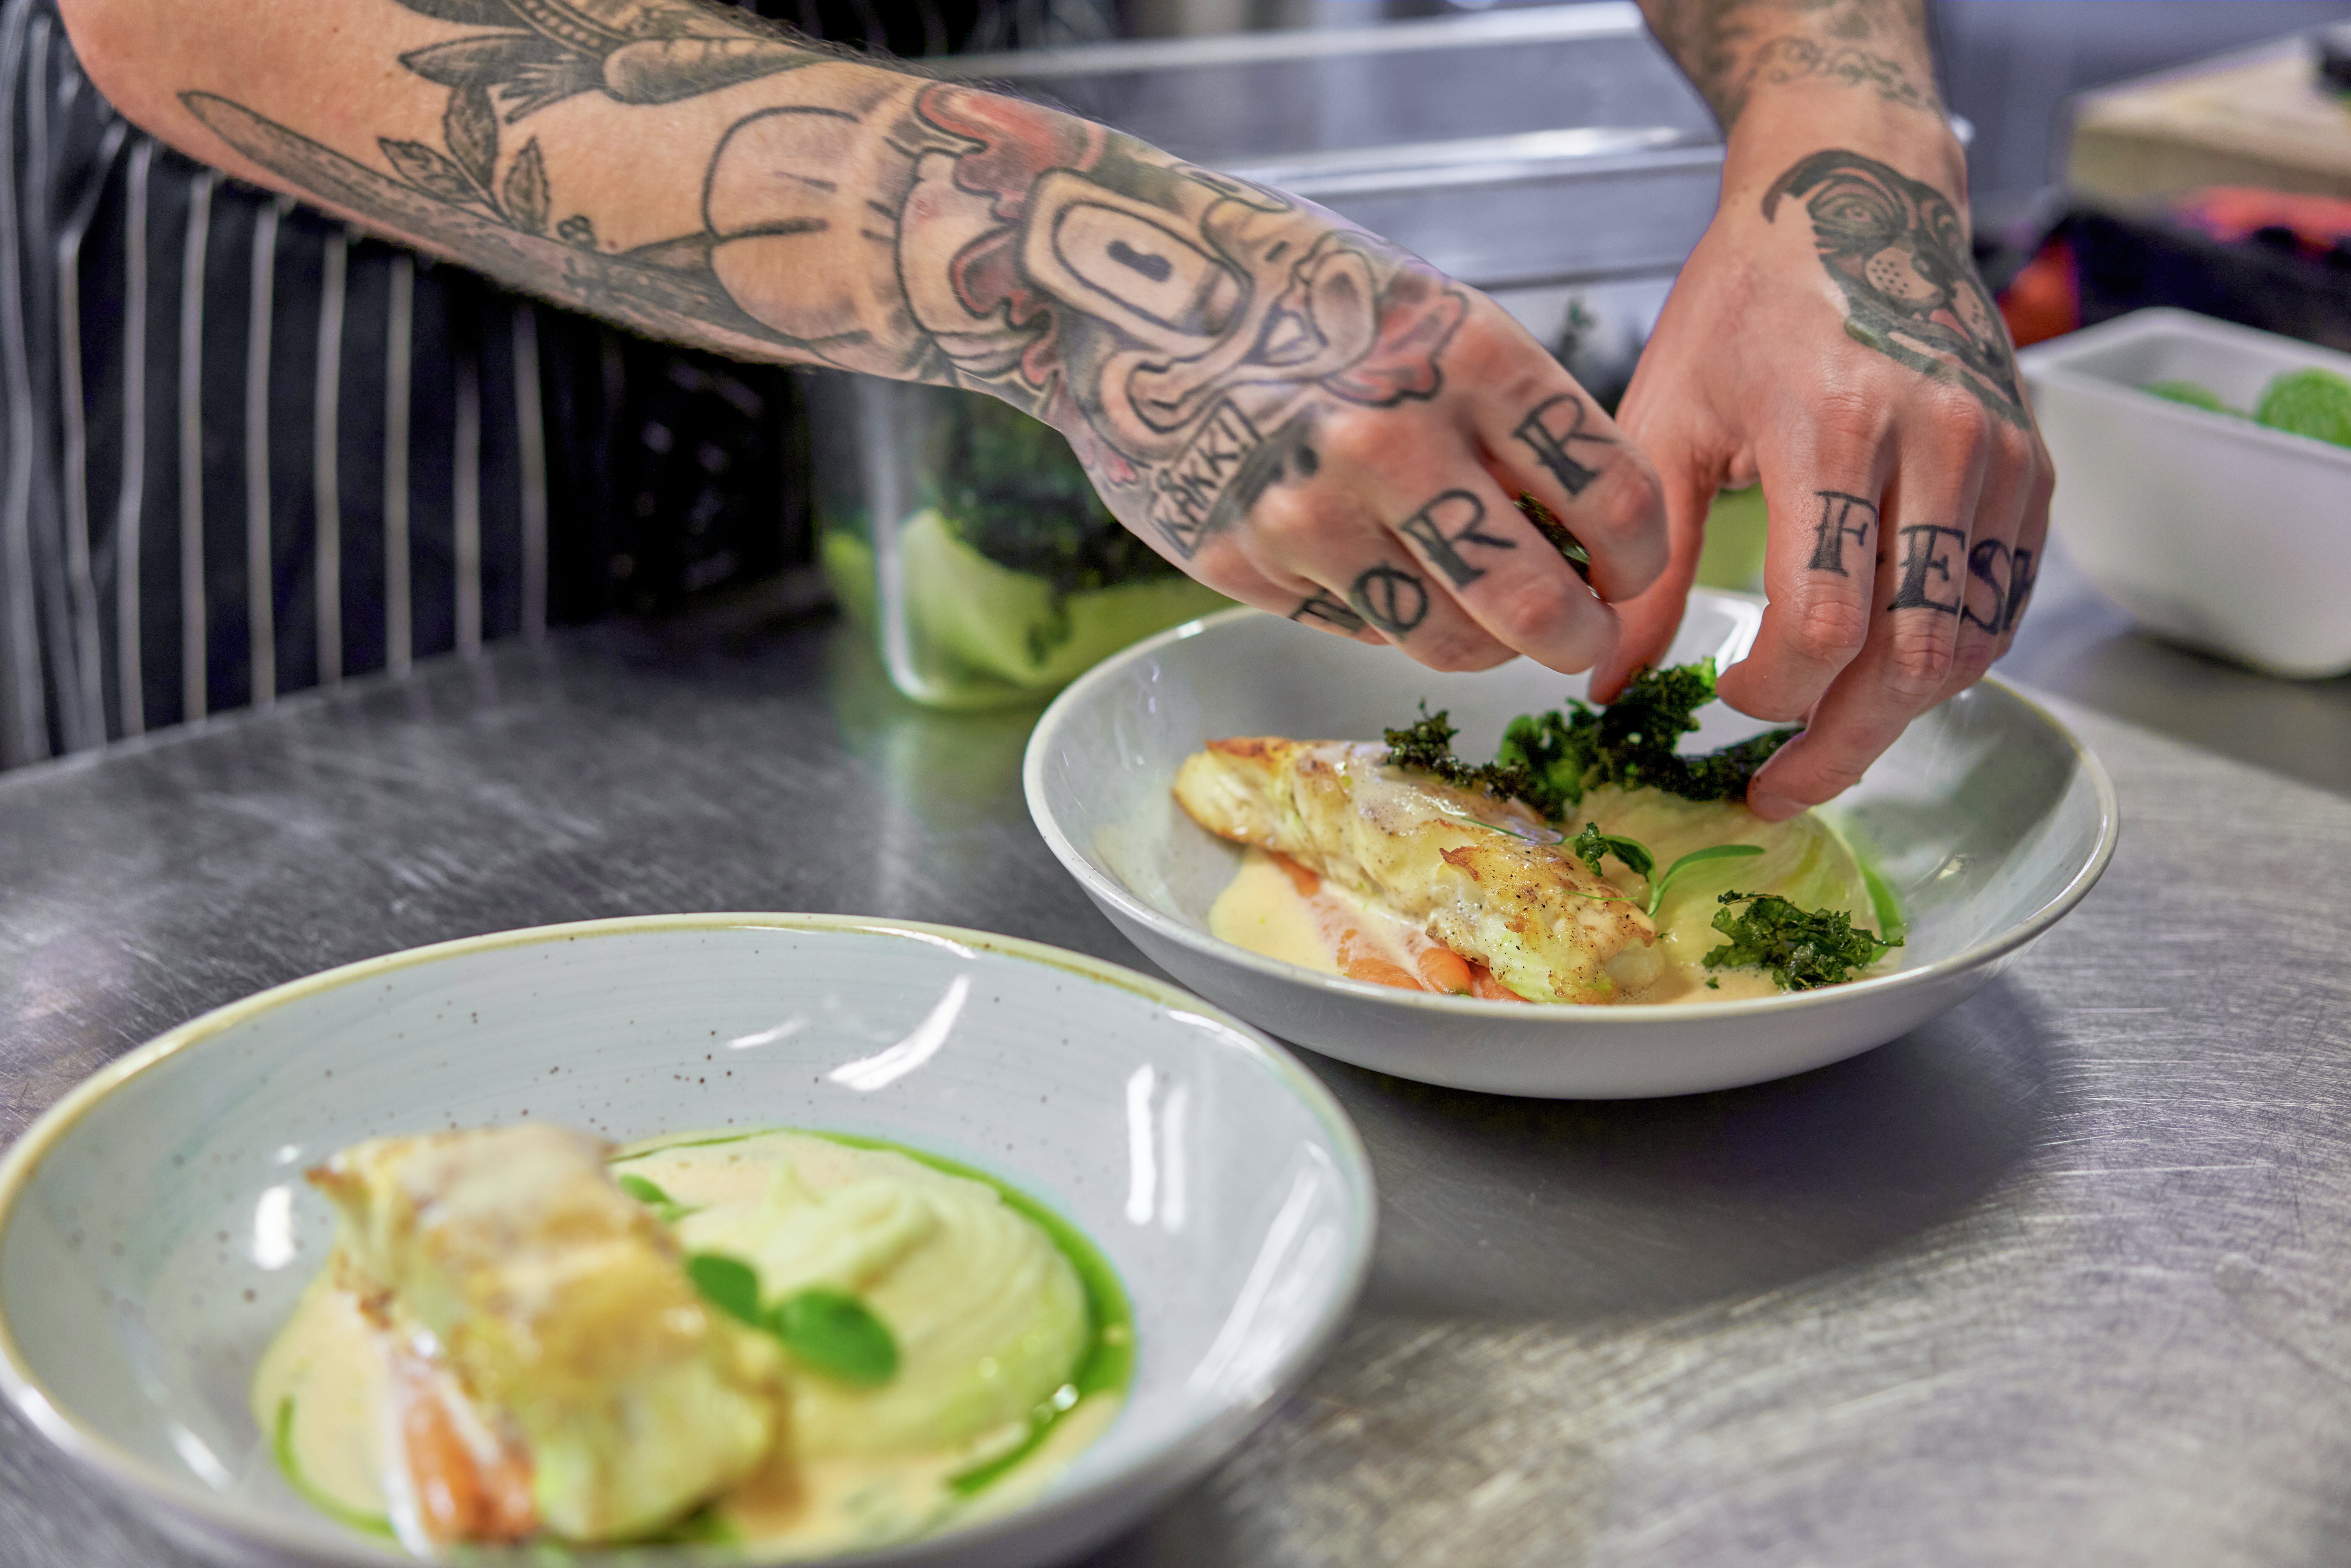 Two hands with tattoes are plating a fish dish in a deep plate.